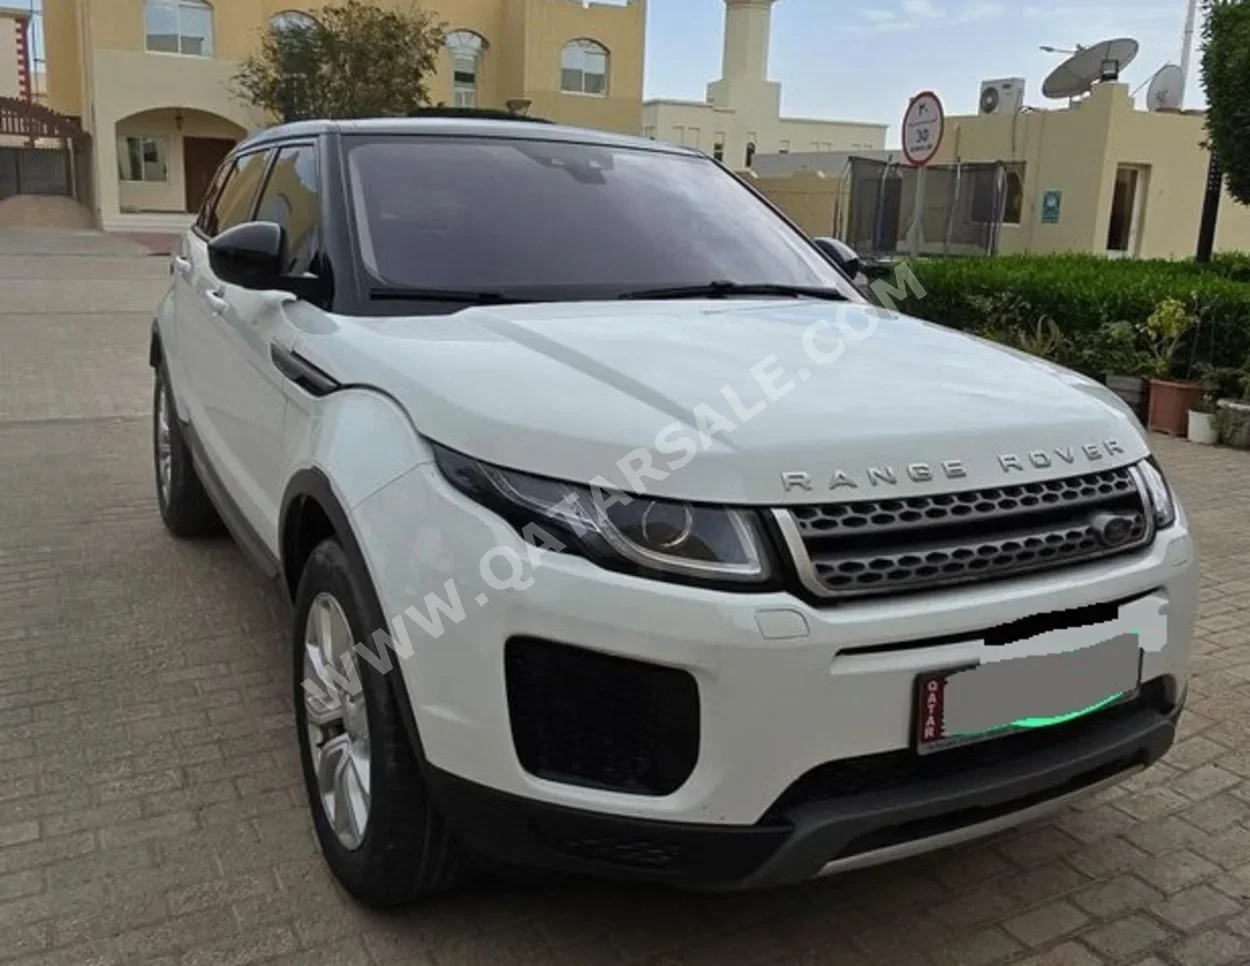 Land Rover  Evoque  2019  Automatic  91,000 Km  4 Cylinder  Four Wheel Drive (4WD)  SUV  White